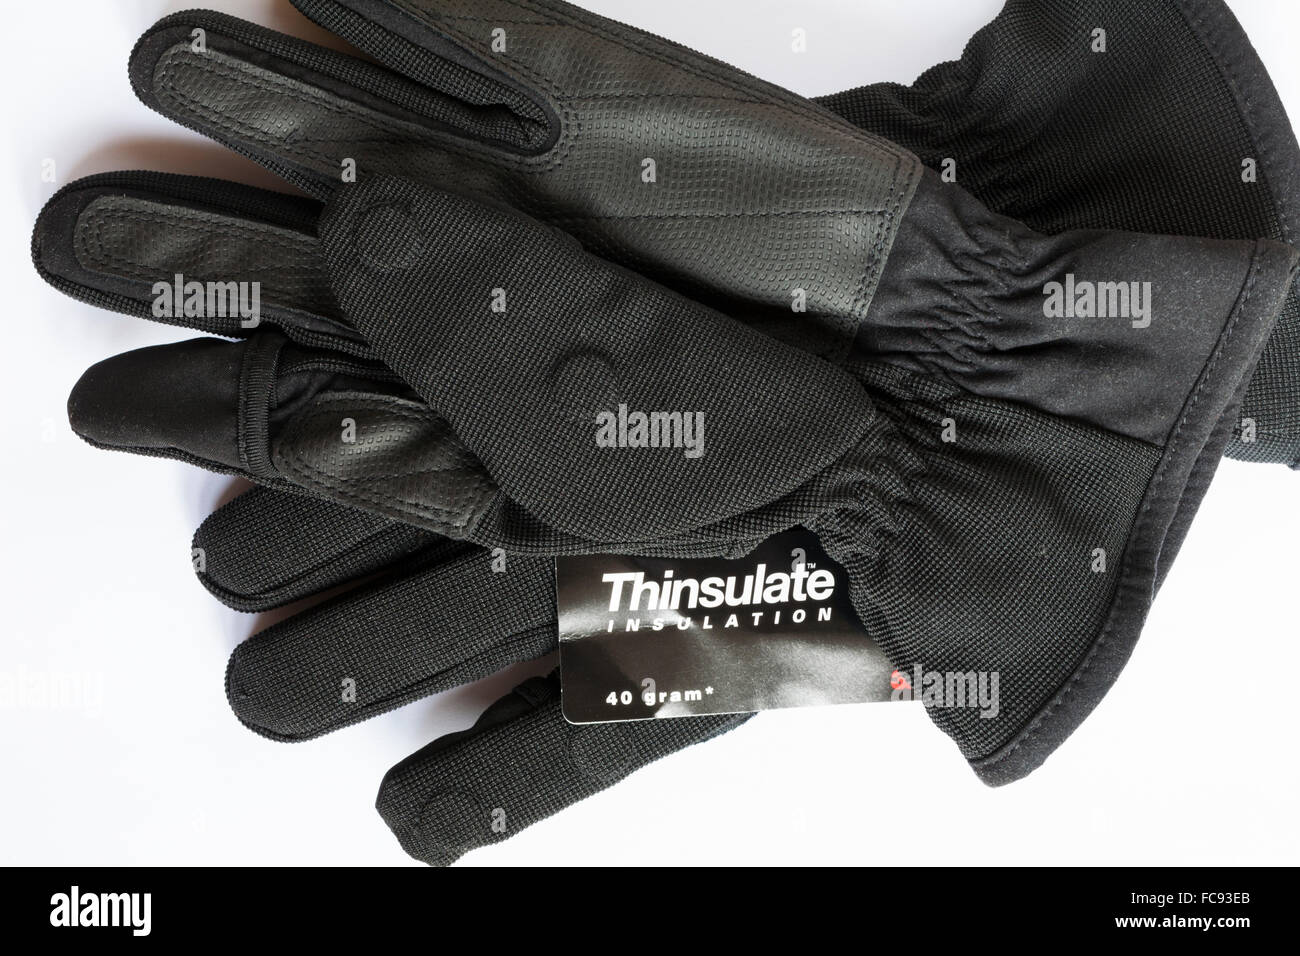 Thinsulate insulation pair of gloves with magnetic fold back fingers set on  white background Stock Photo - Alamy